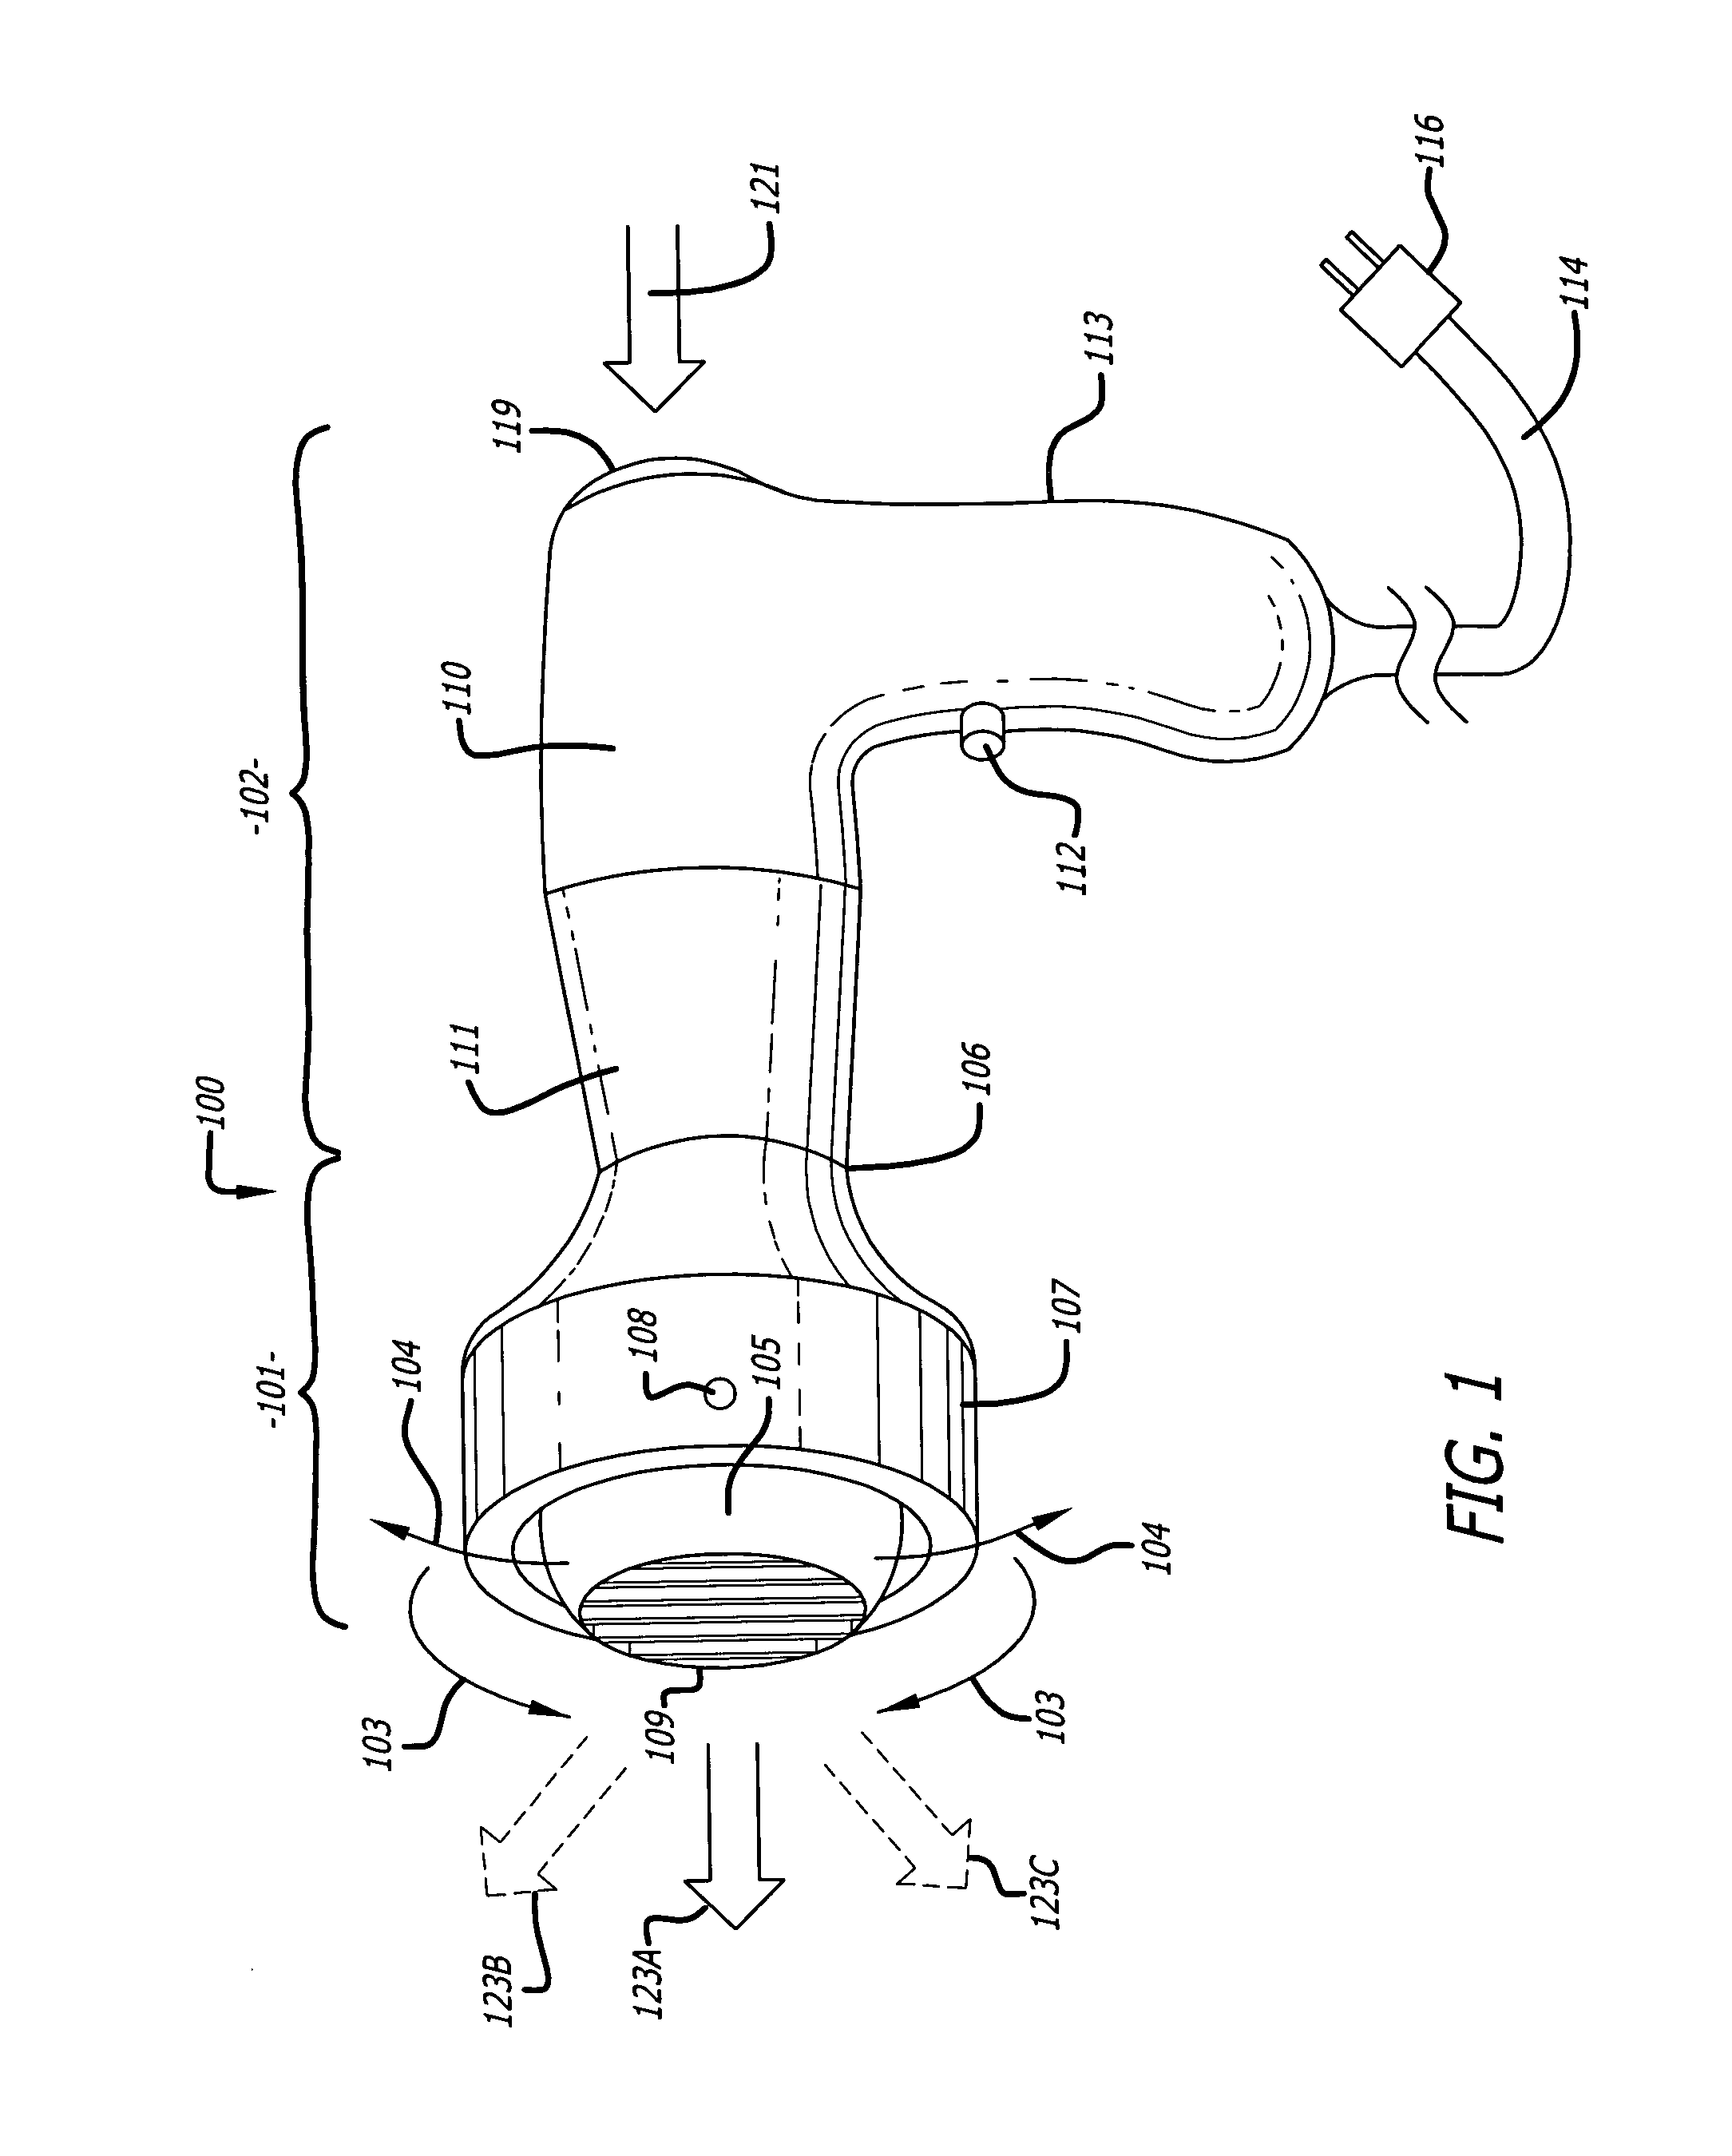 Automatic air movement for hair dryers